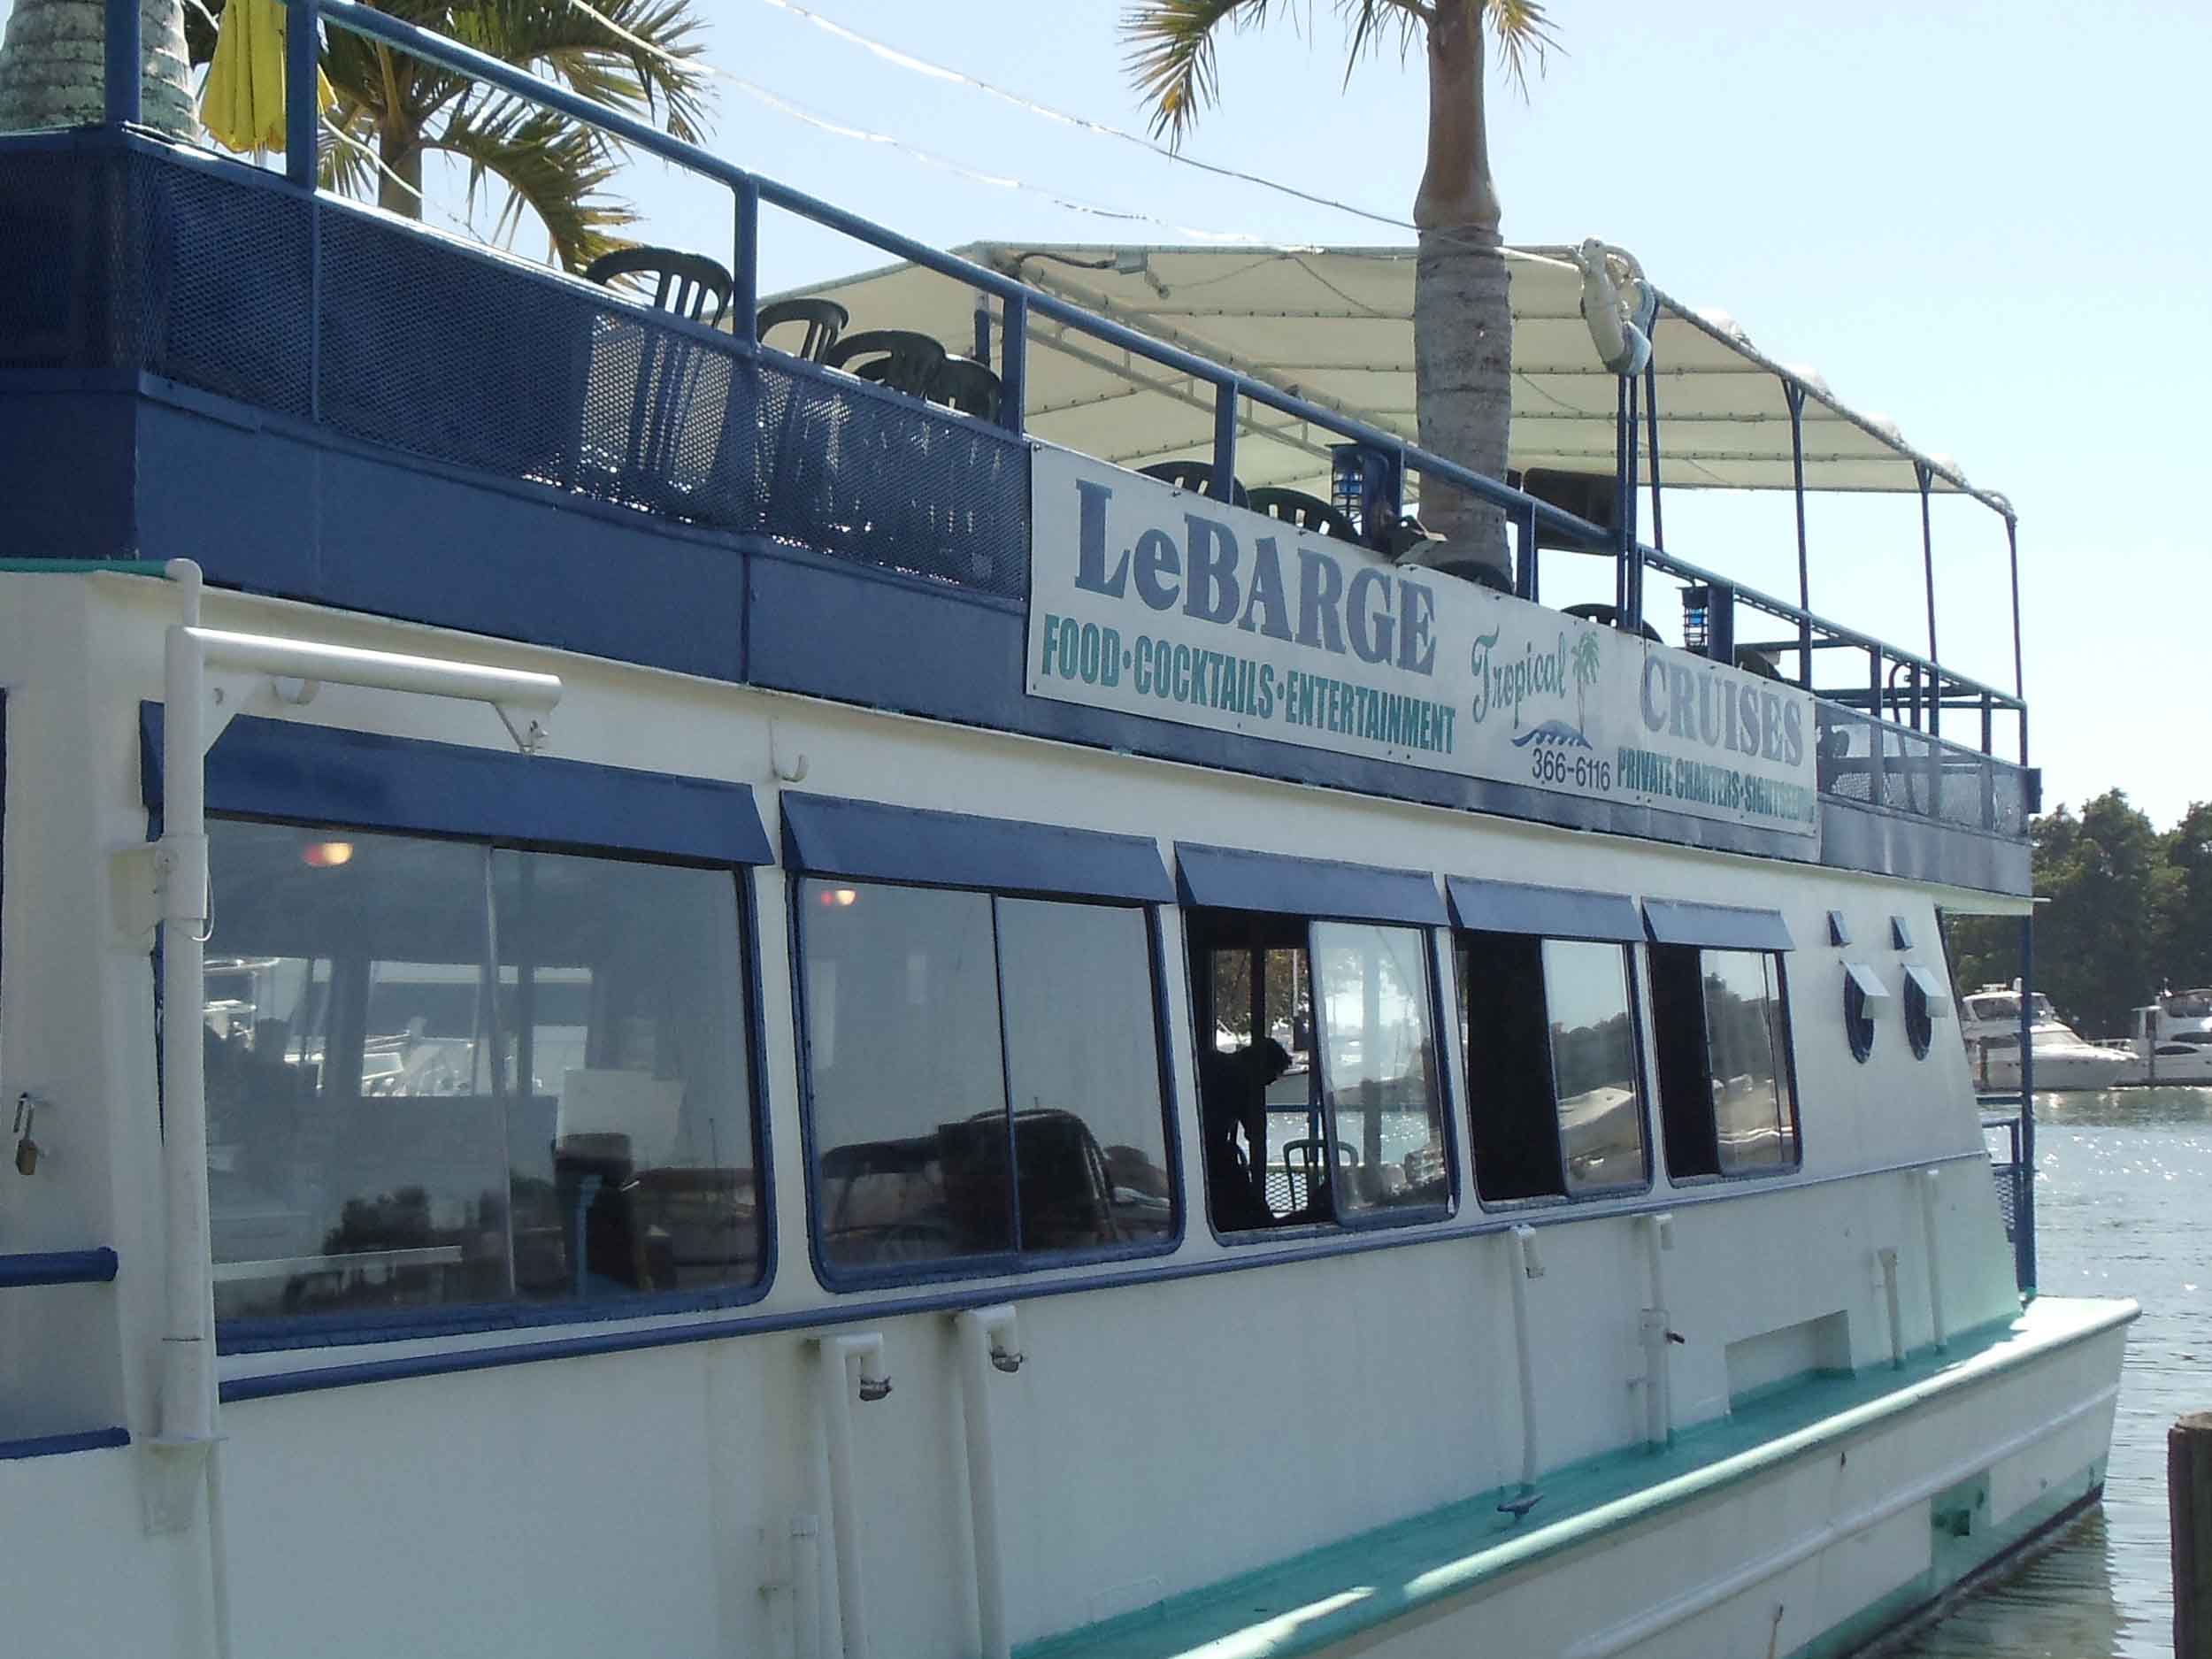 LeBarge Tropical Cruise Exterior